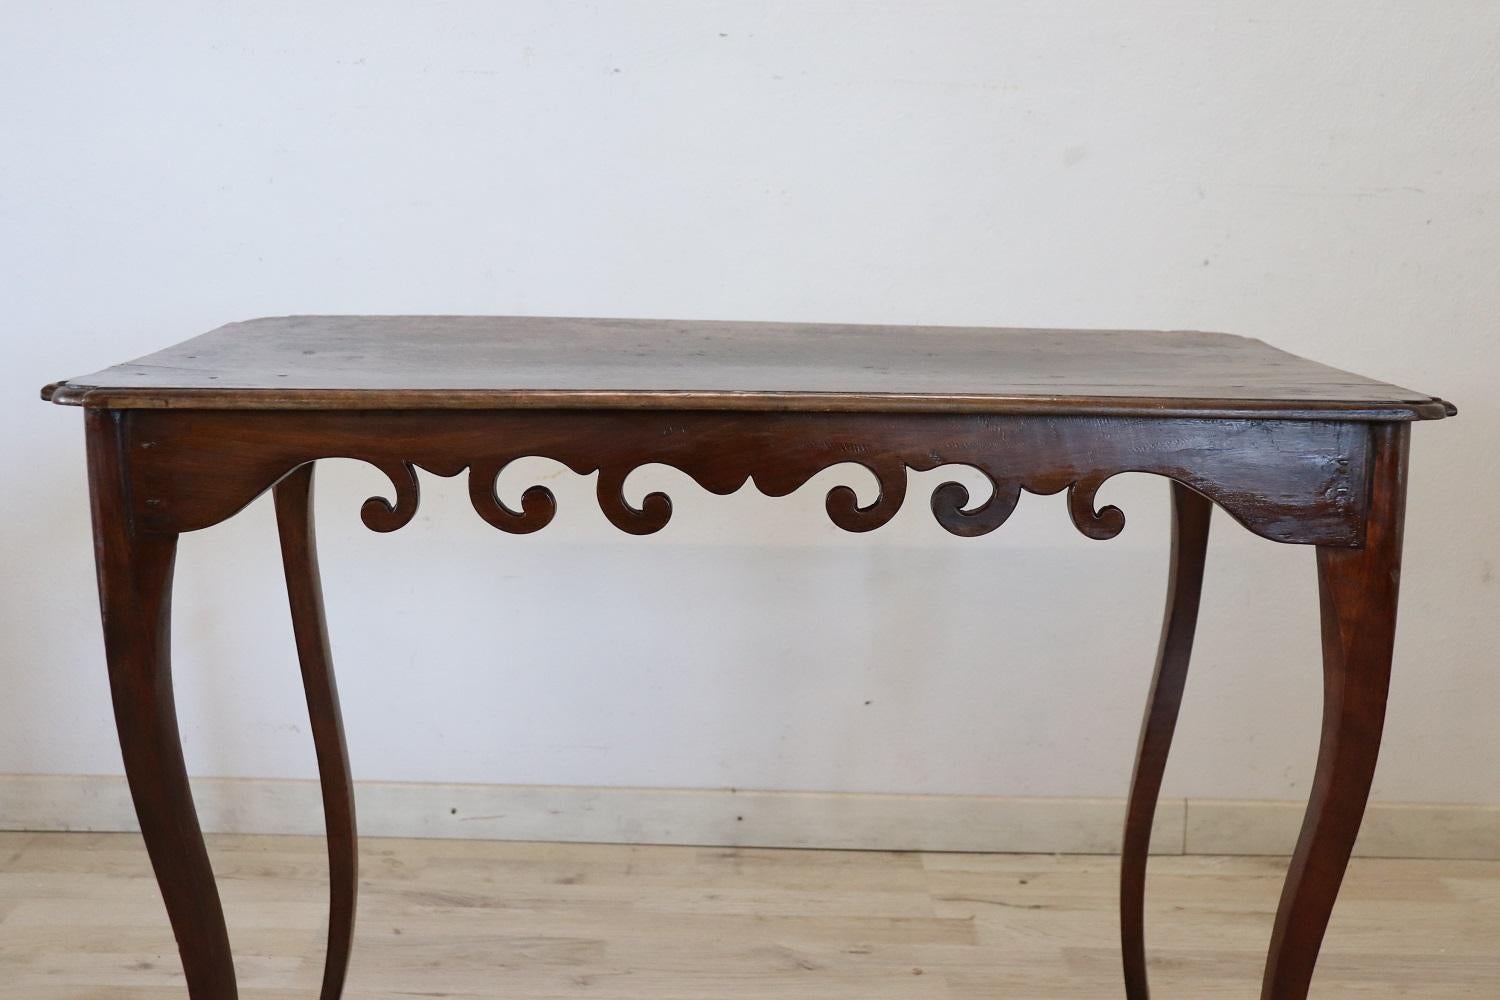 18th Century Louis XV Walnut Antique Side Table with Engraved Date 1778 For Sale 1